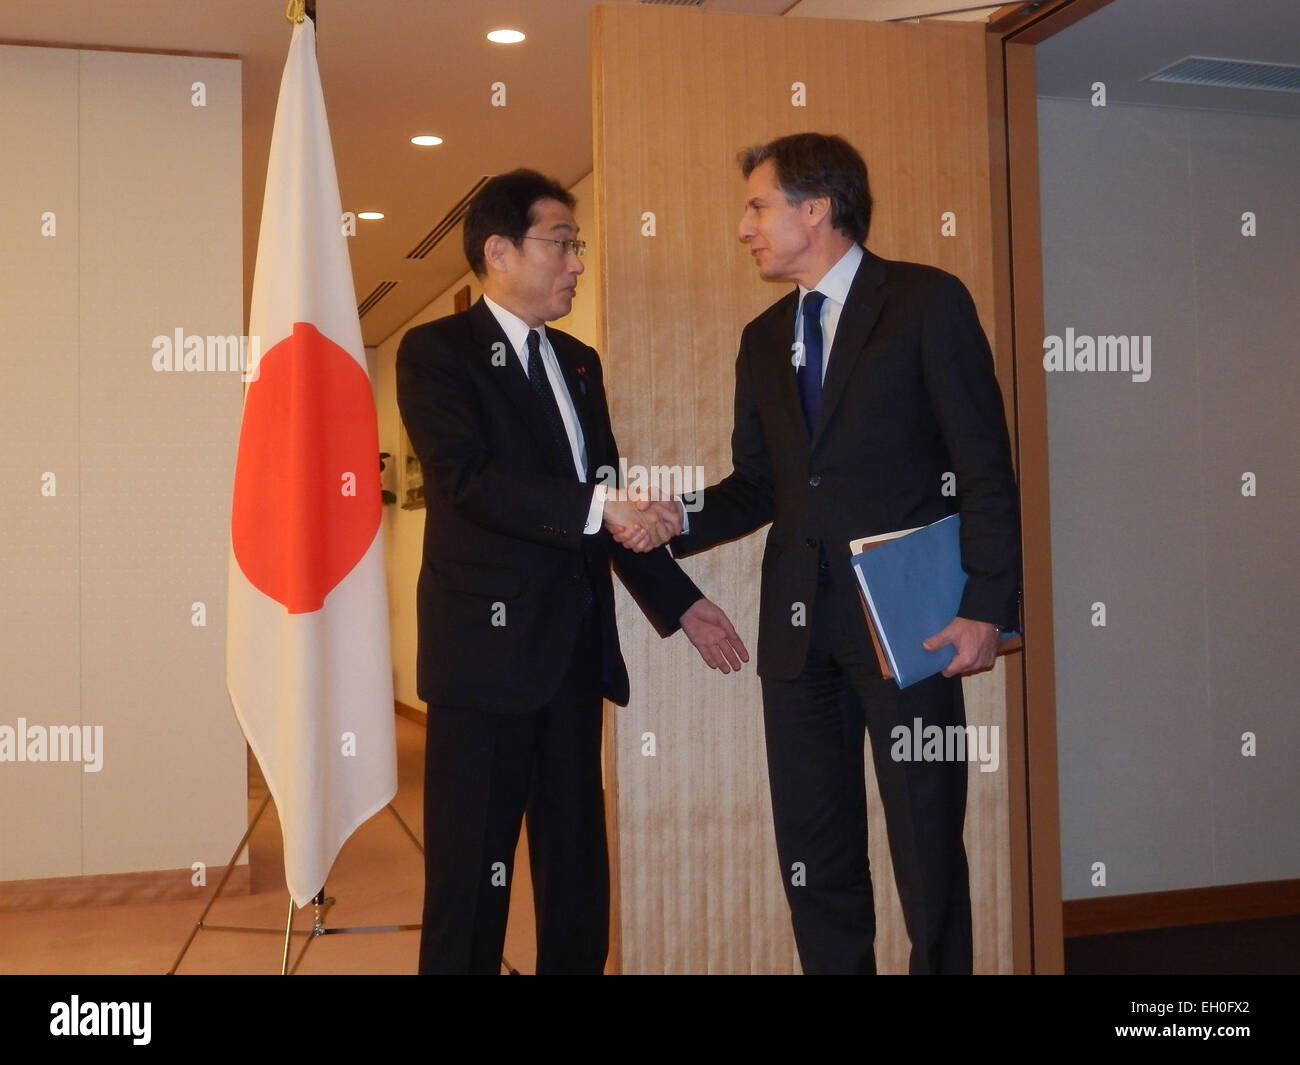 Deputy Secretary of State Antony &quot;Tony&quot; Blinken, right, is greeted by Japanese Foreign Minister Fumio Kishida prior to a meeting at the Ministry of Foreign Affairs in Tokyo, Japan, on February 13, 2014. Stock Photo